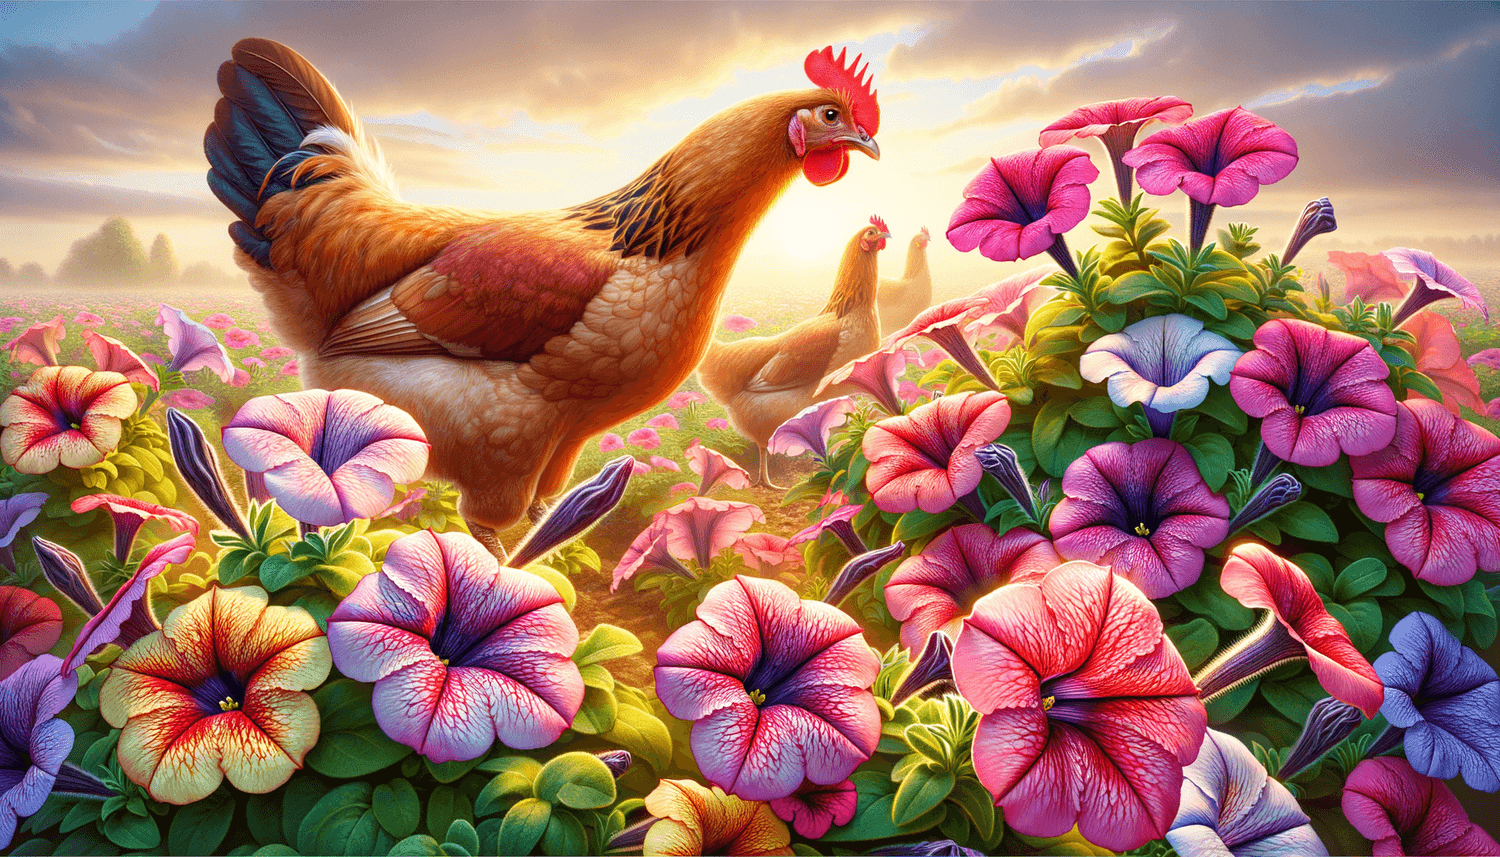 Can Chickens Eat Petunia Flowers?